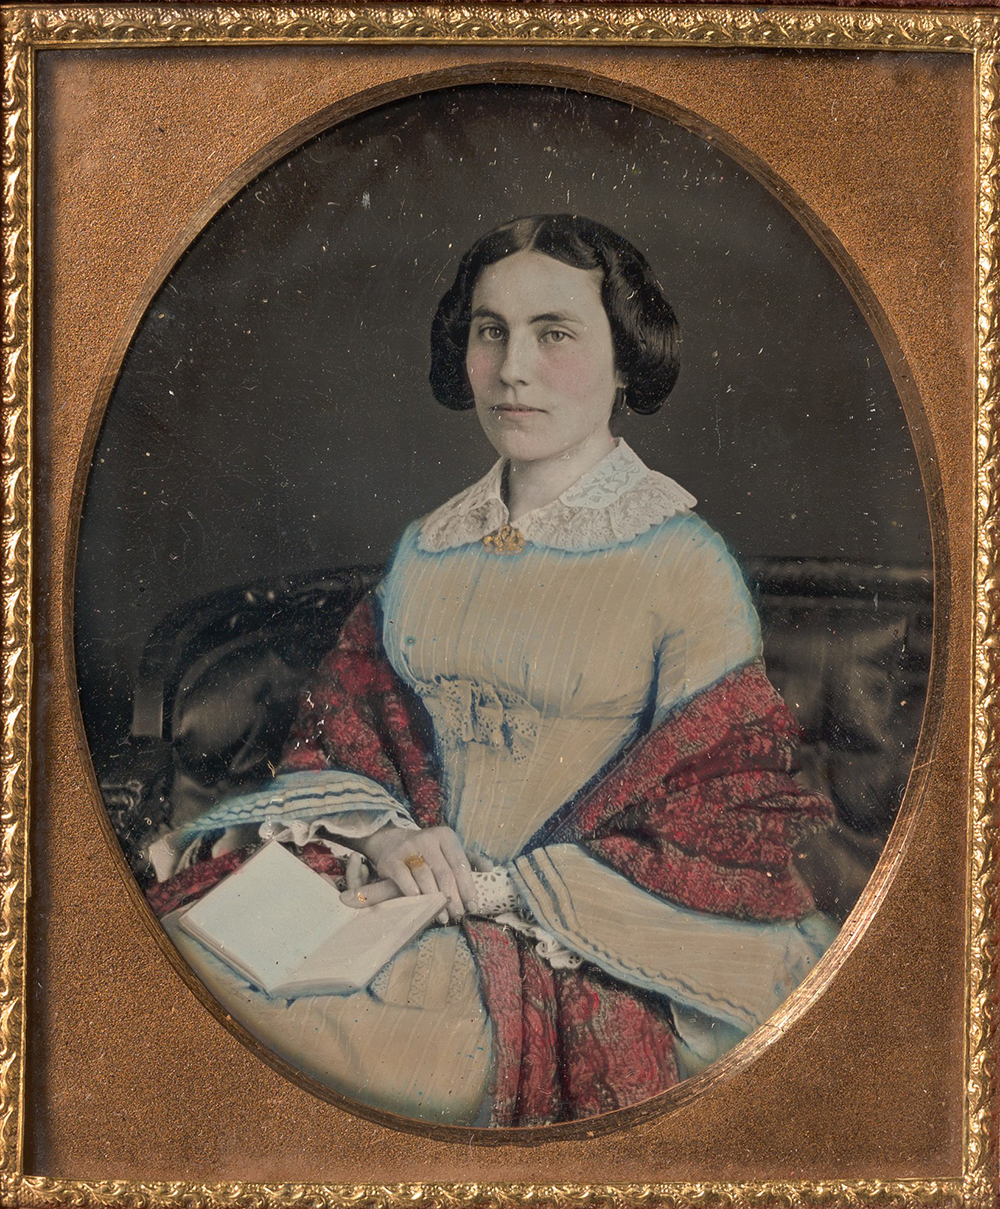 Seated young woman wearing a shawl, holding an open book in her lap, American, c. 1850.